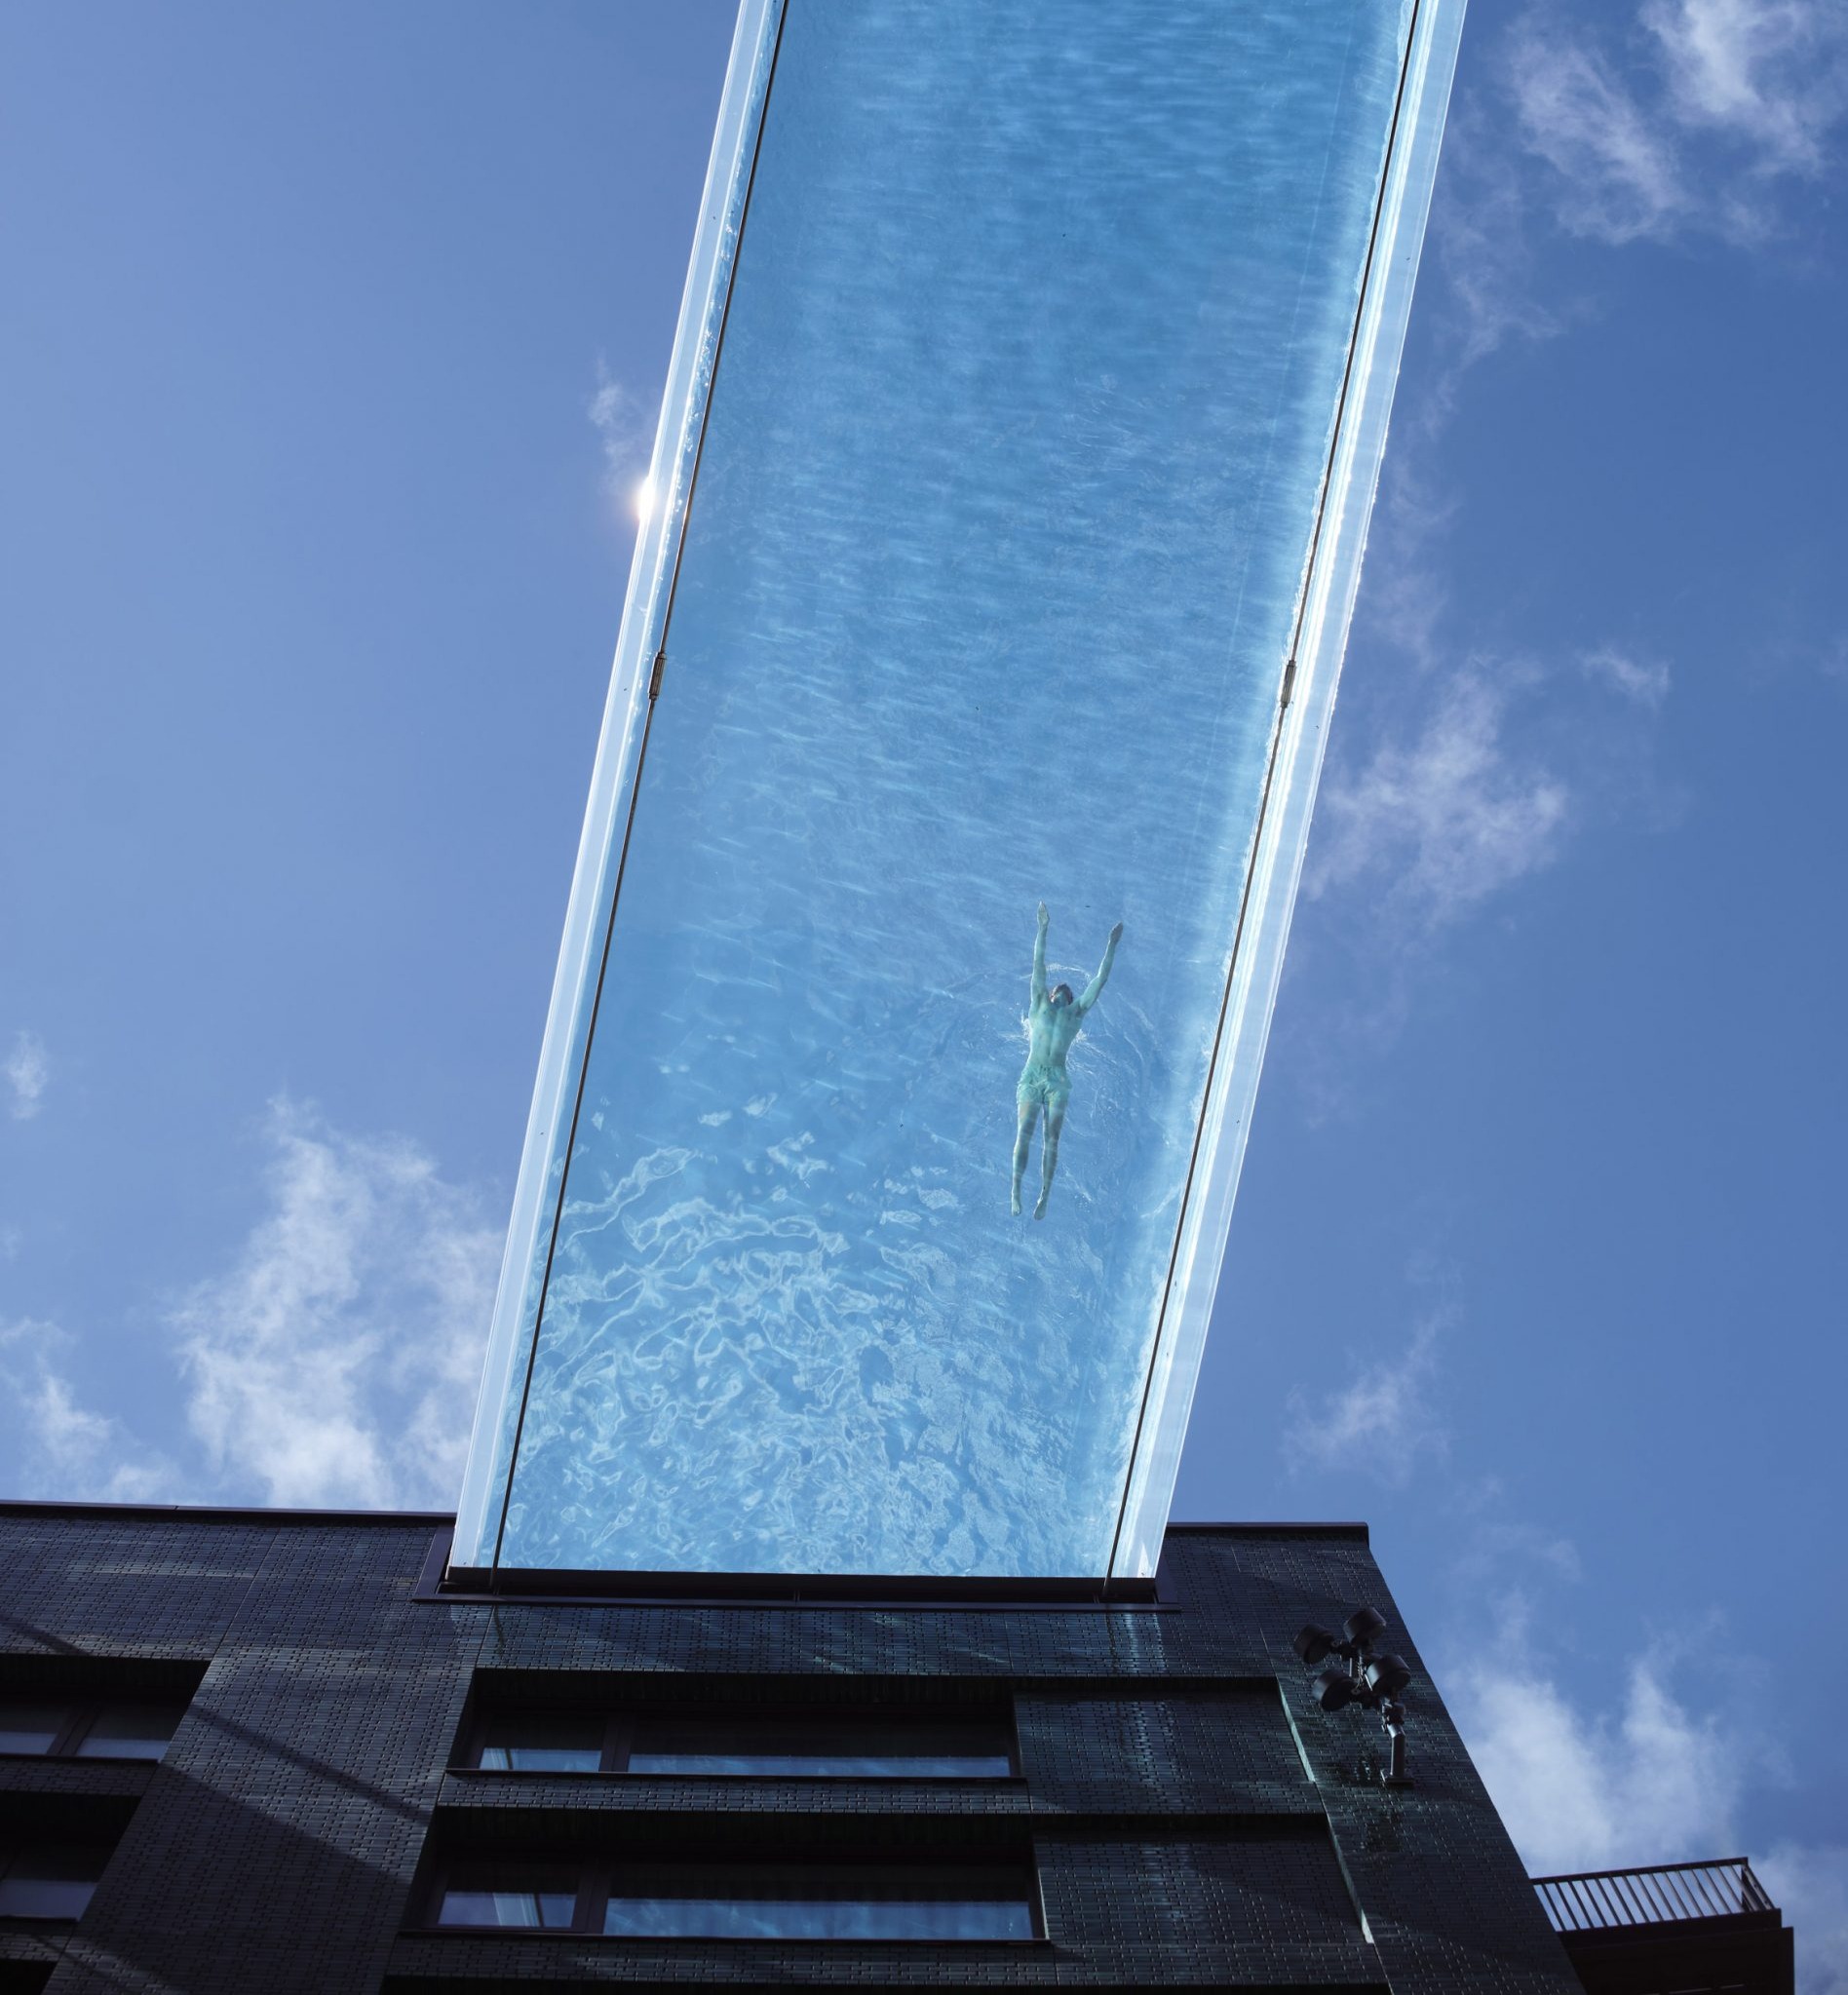 Watch: A swimmer in London’s fully transparent Sky Pool